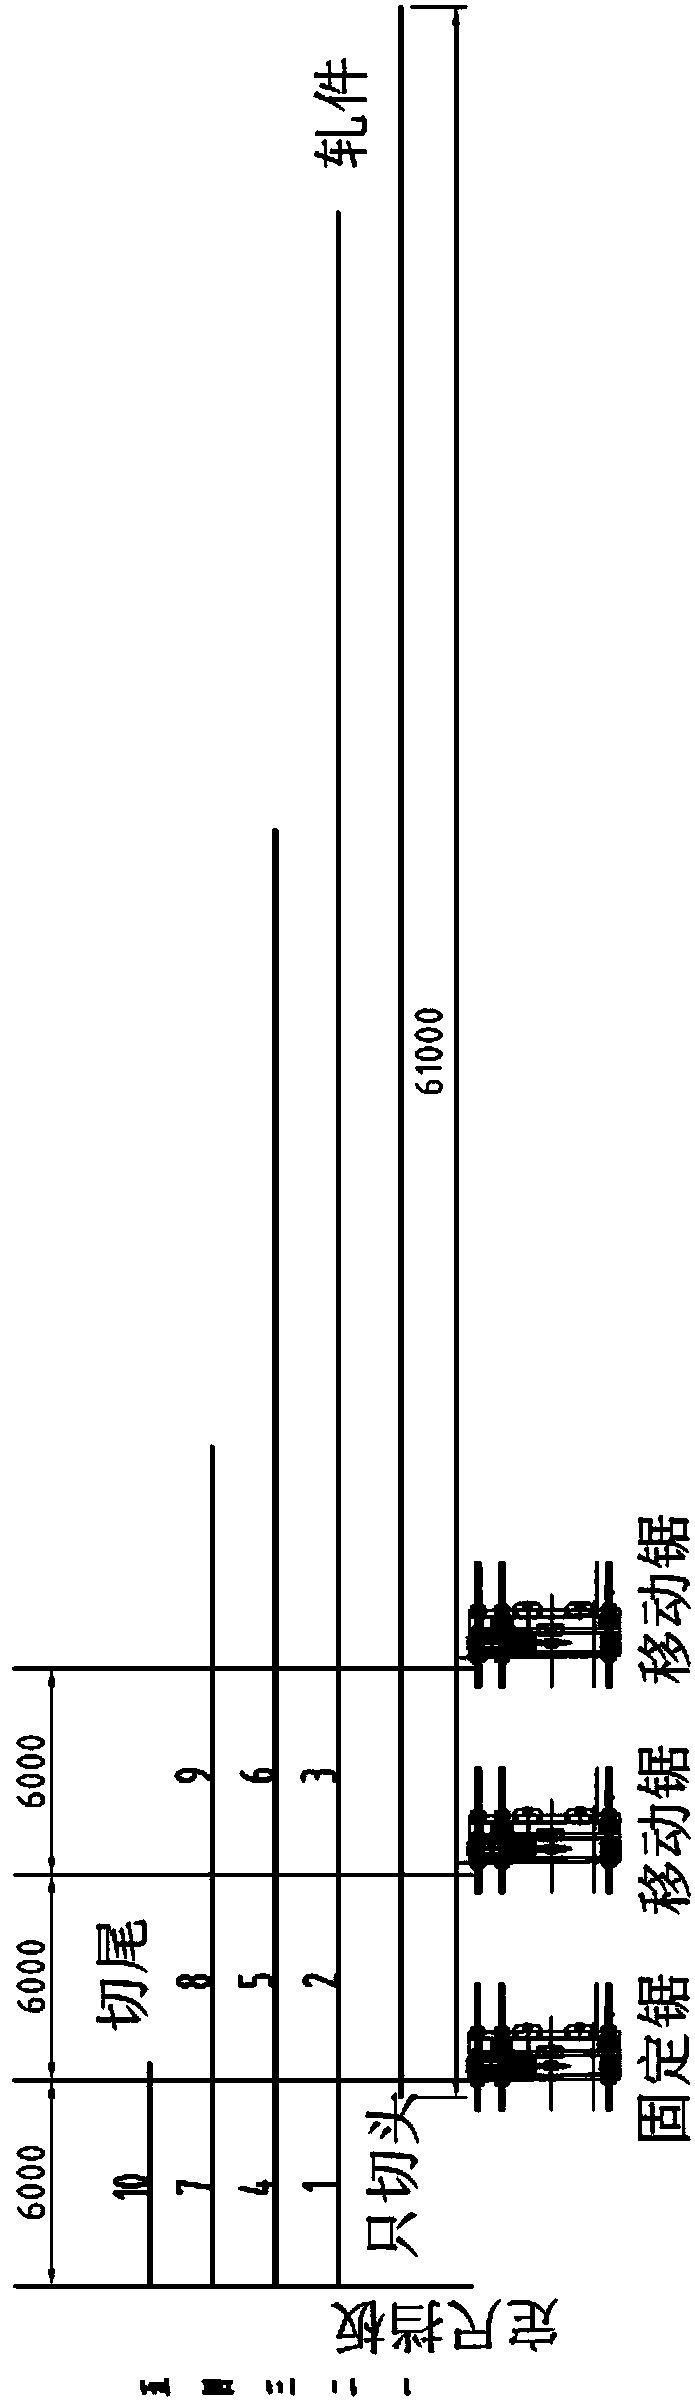 Method and device for sizing and sawing large-sized profiles